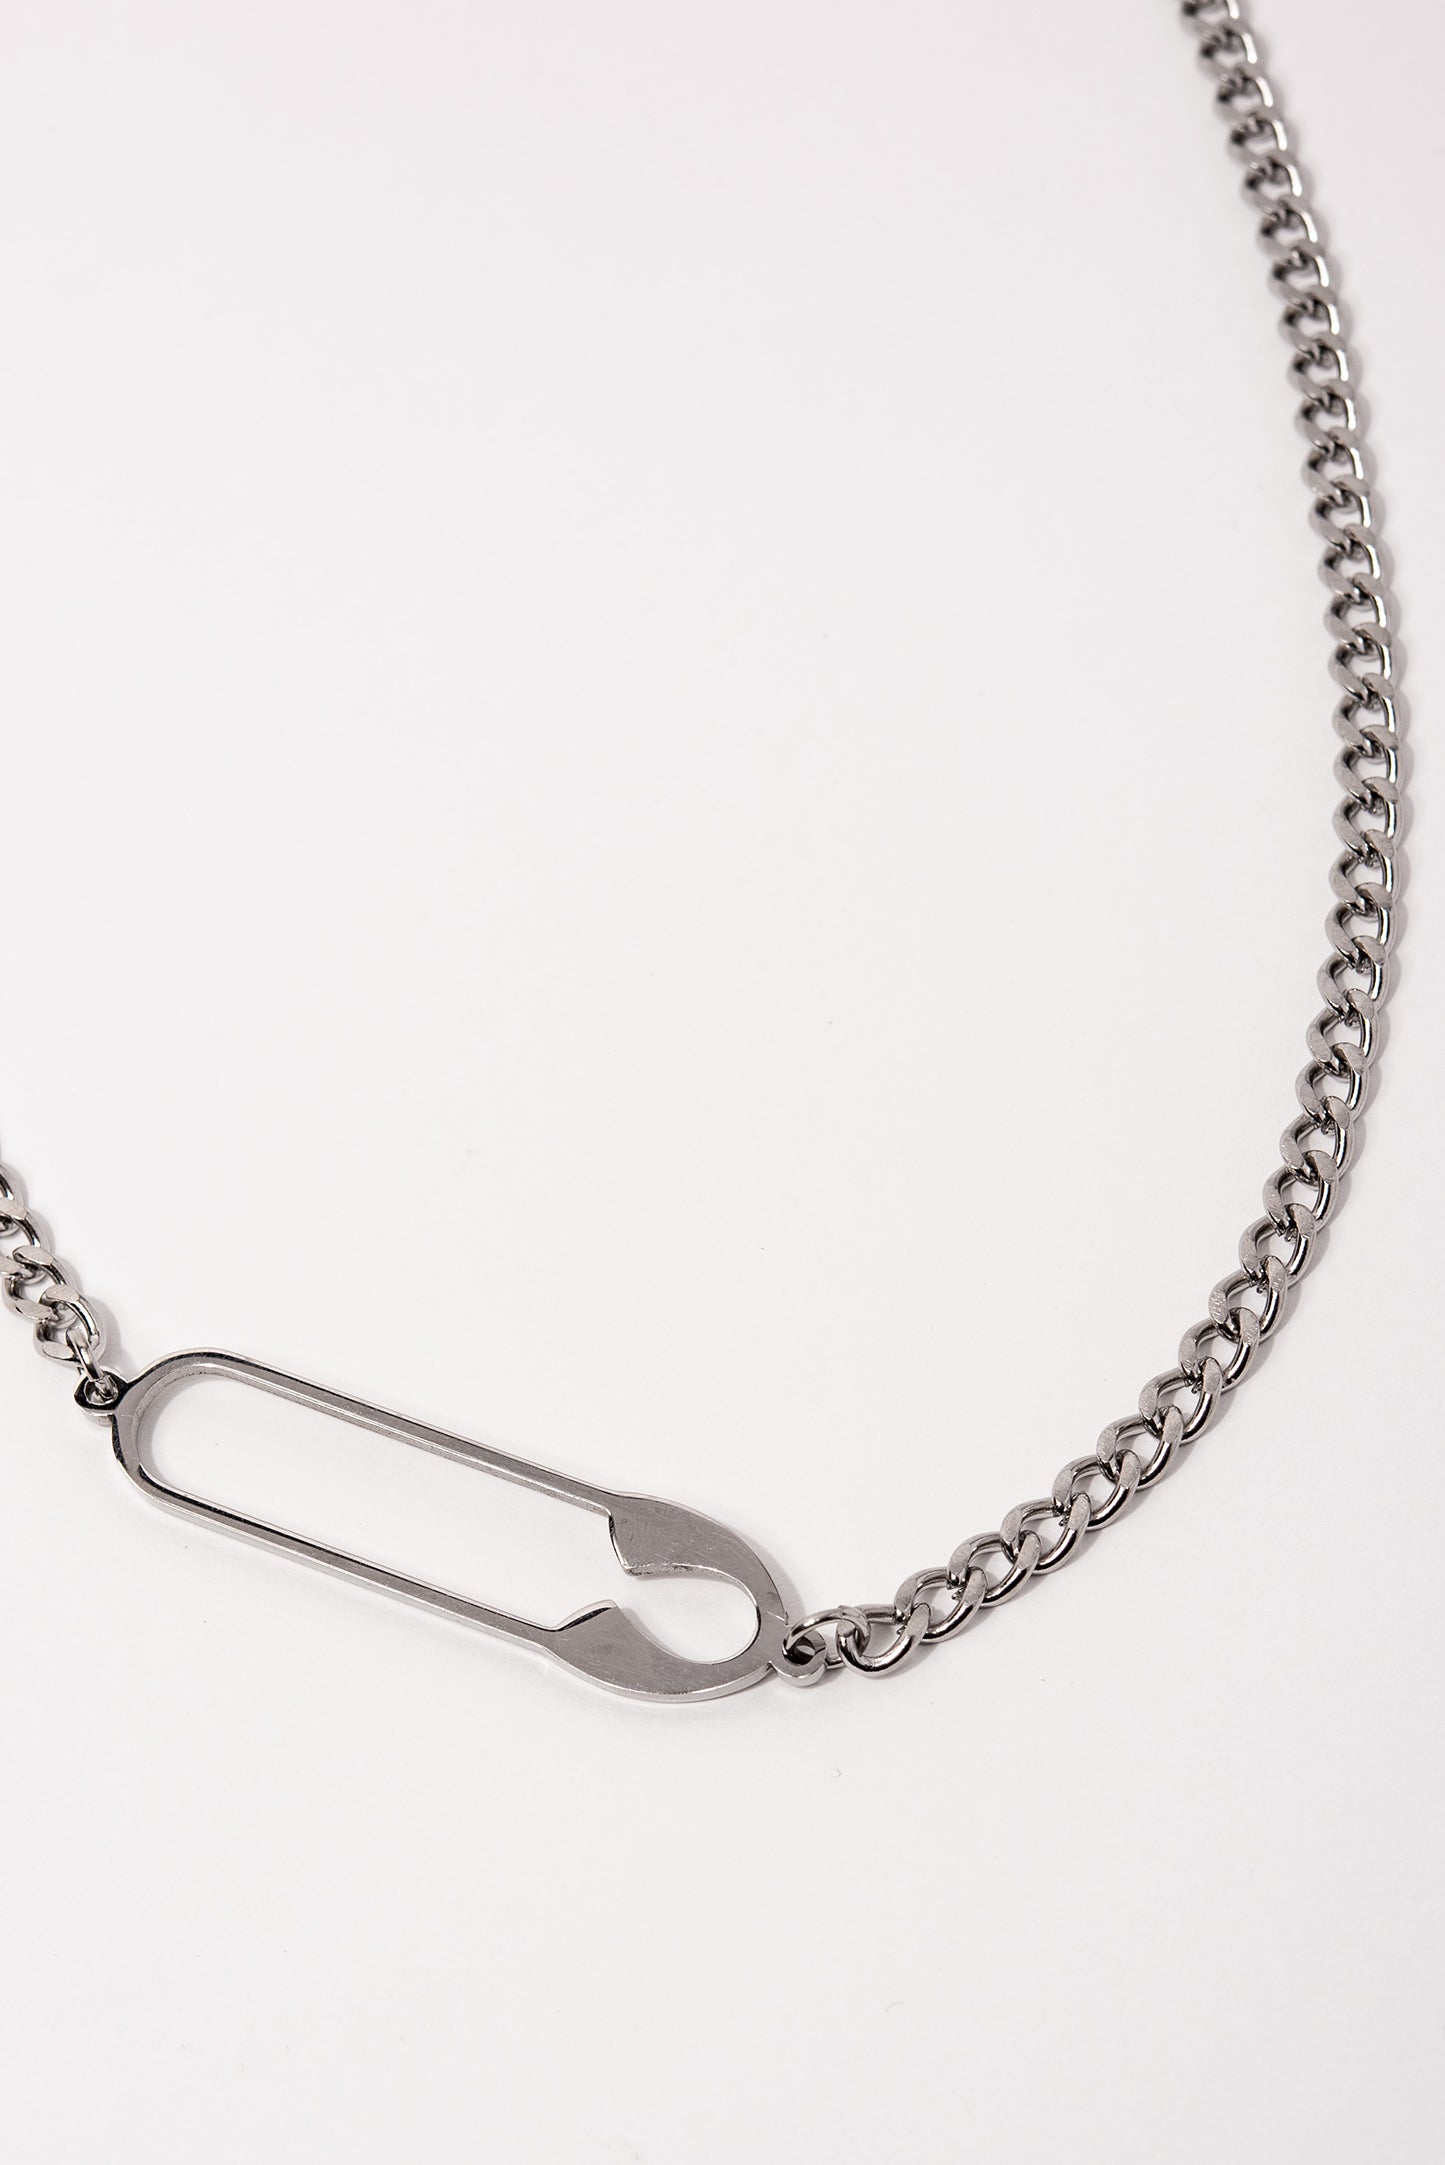 Stainless Steel Curb Chain Necklace with Safety Pin Pendant